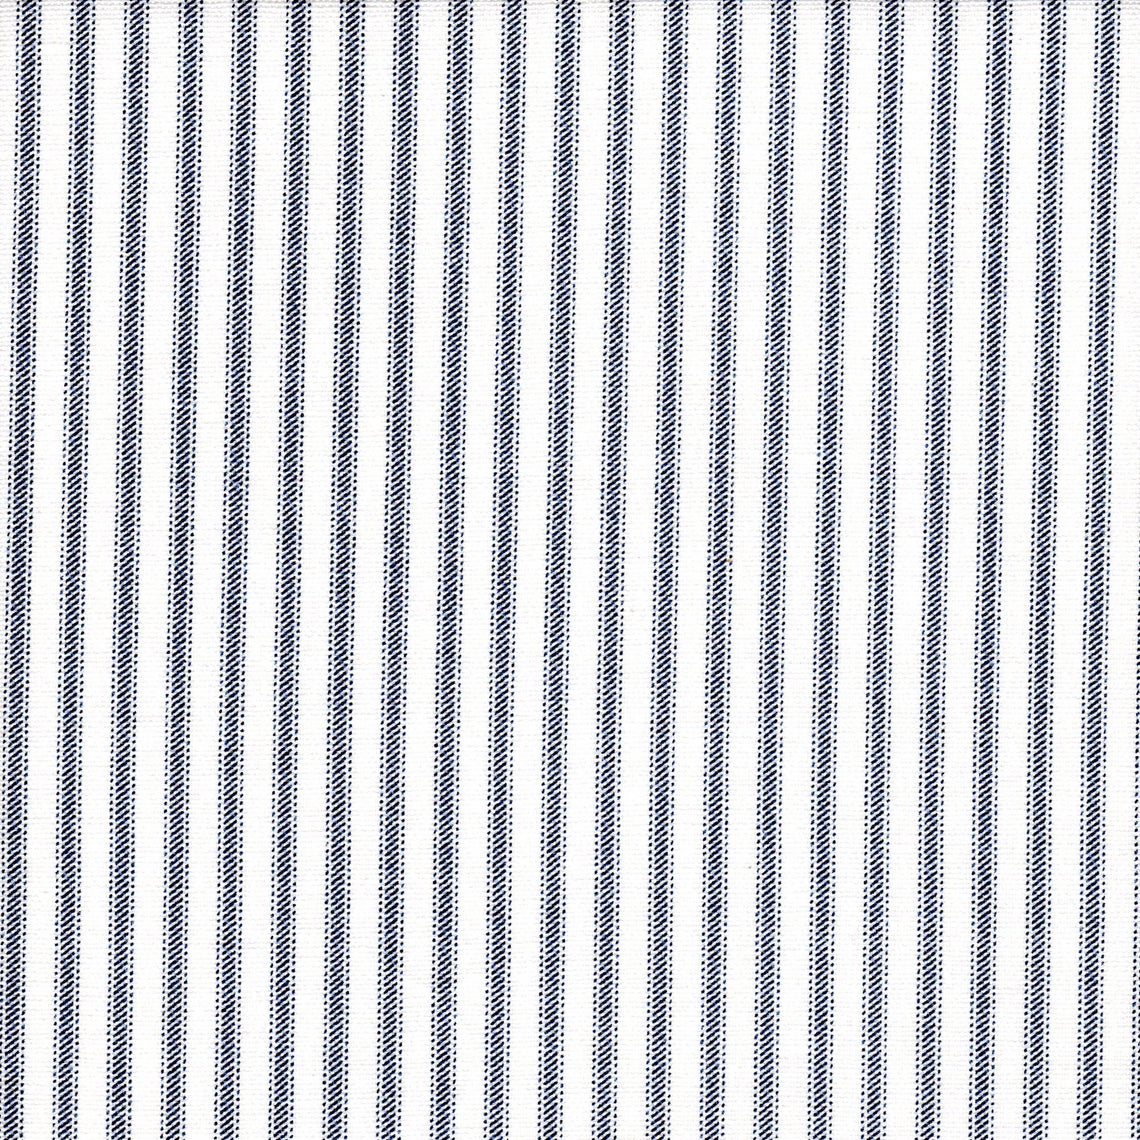 gathered bedskirt in classic navy blue ticking stripe on white